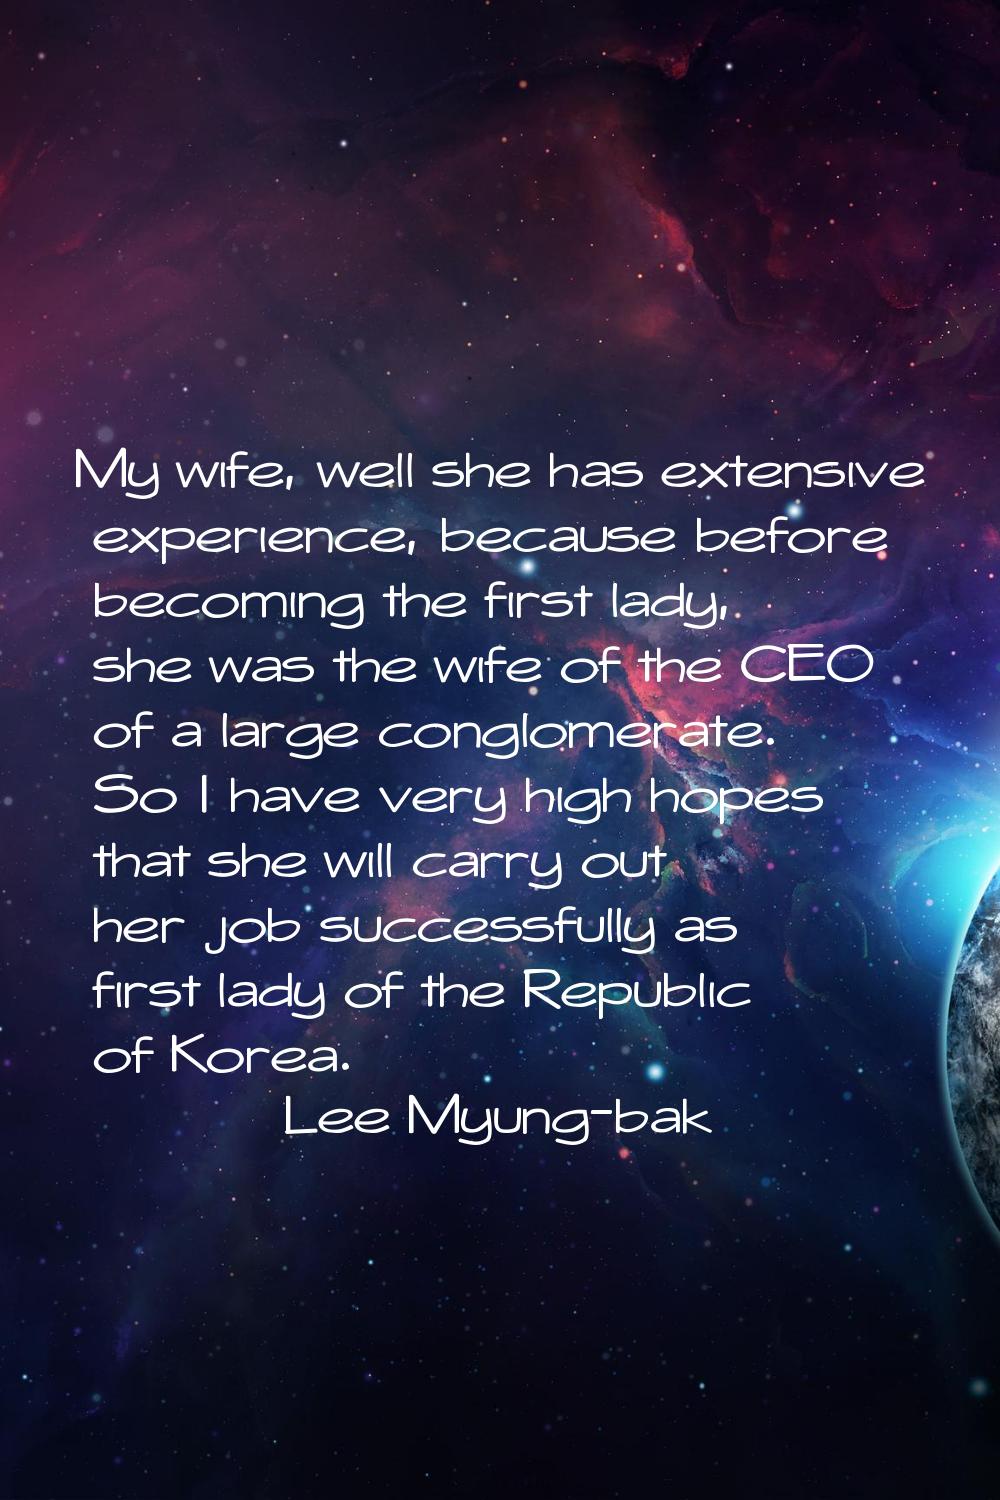 My wife, well she has extensive experience, because before becoming the first lady, she was the wif